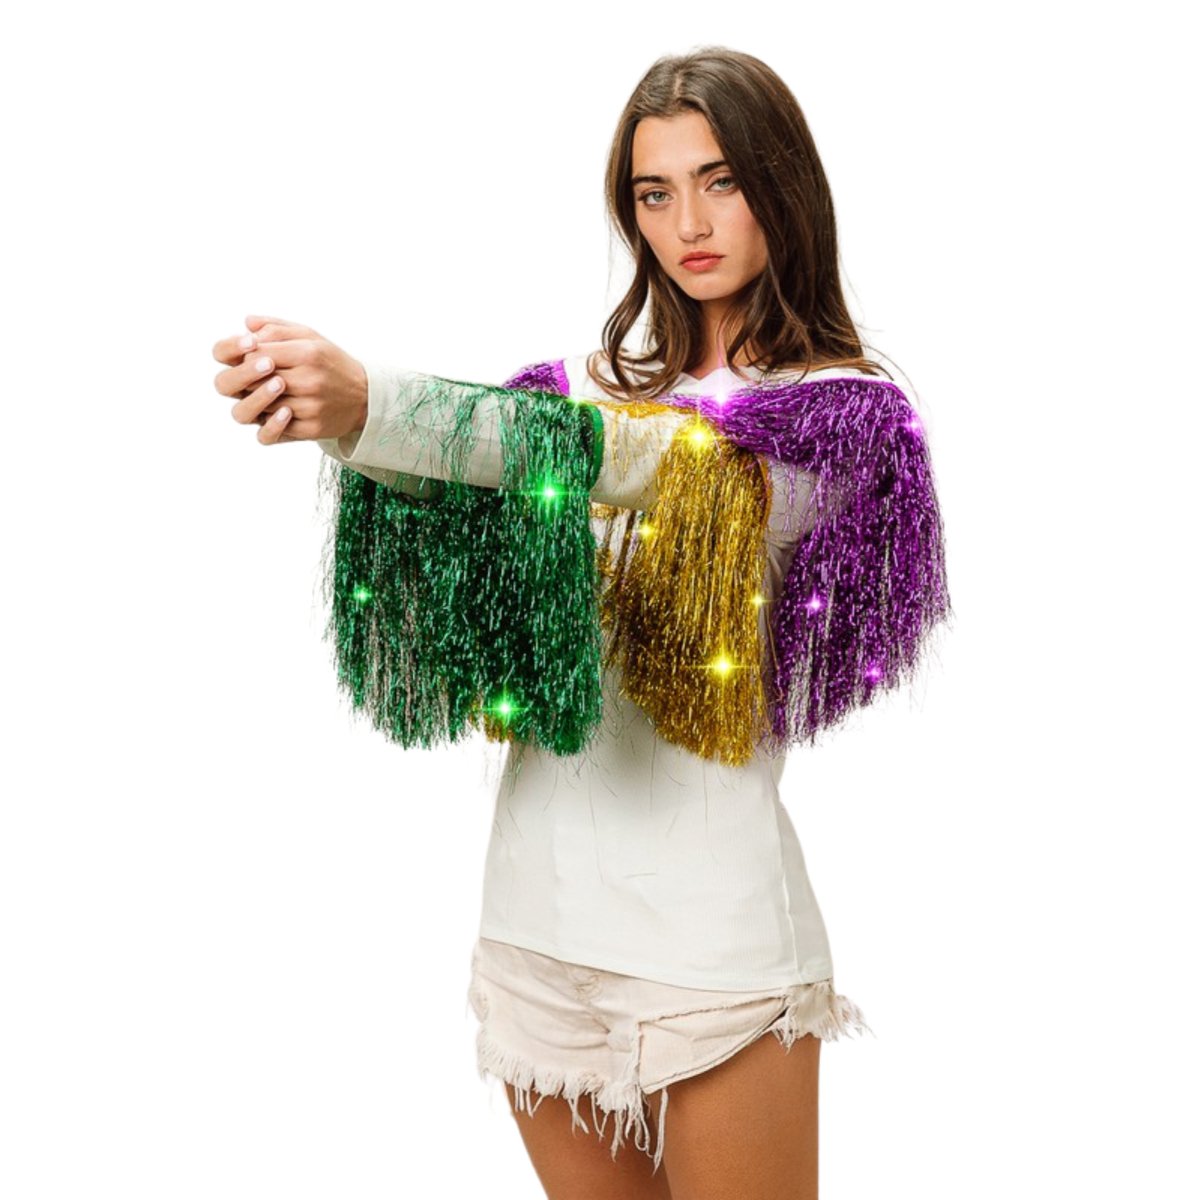 Mardi Gras White Top With Colorful Tiered Tinsel Fringe - Mardi Gras Apparel